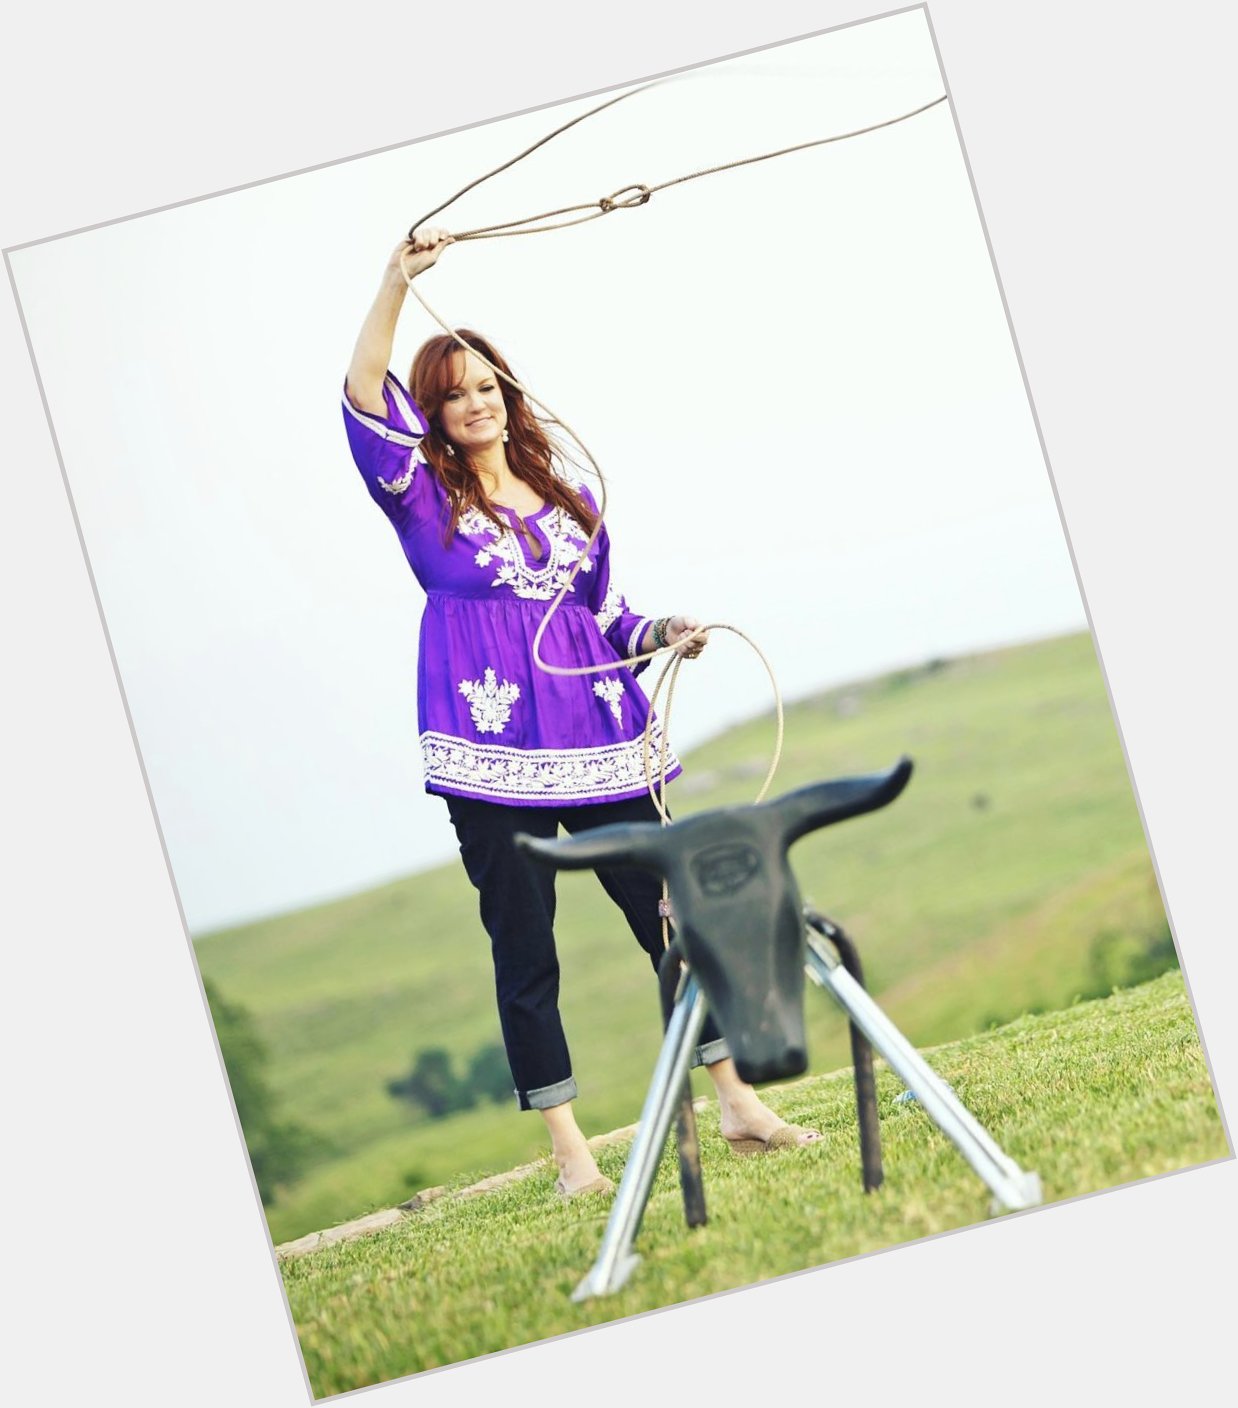 A very happy birthday to everyone\s favorite cattle-wrangling, cowboy-loving cook, Ree Drummond! 